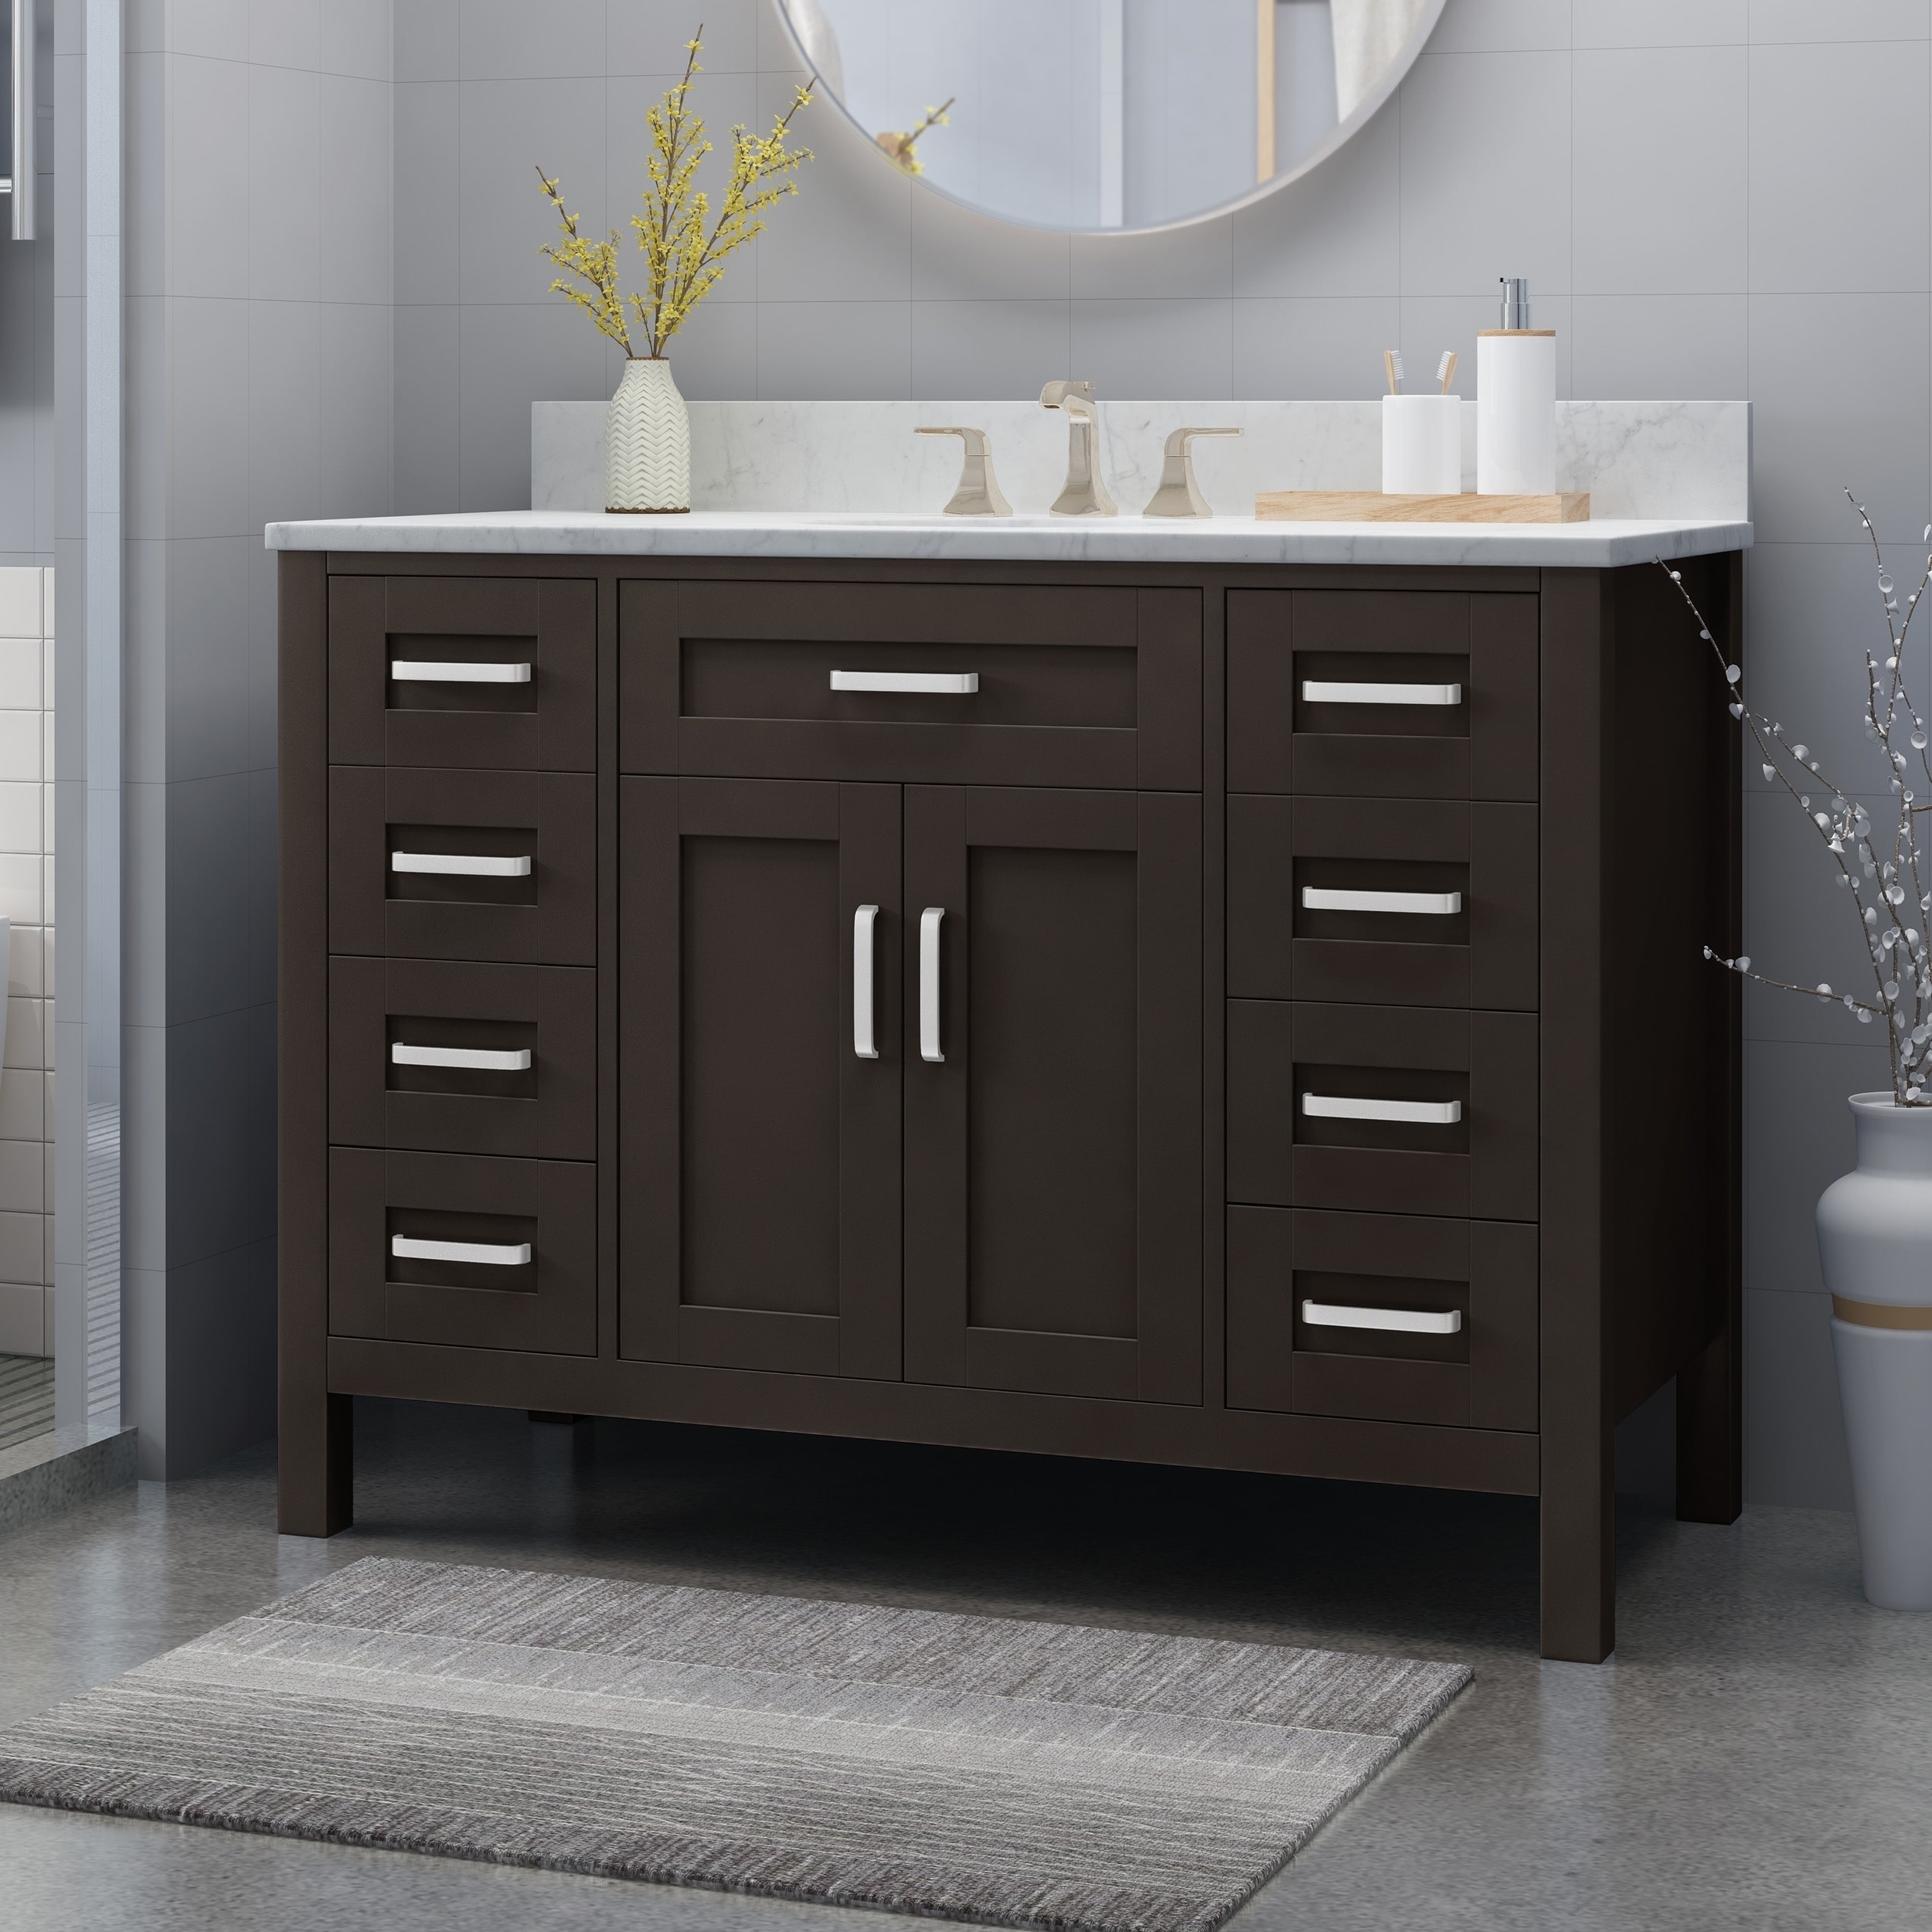 Greeley 5" Wood Bathroom Vanity (Counter Top Not Included) by